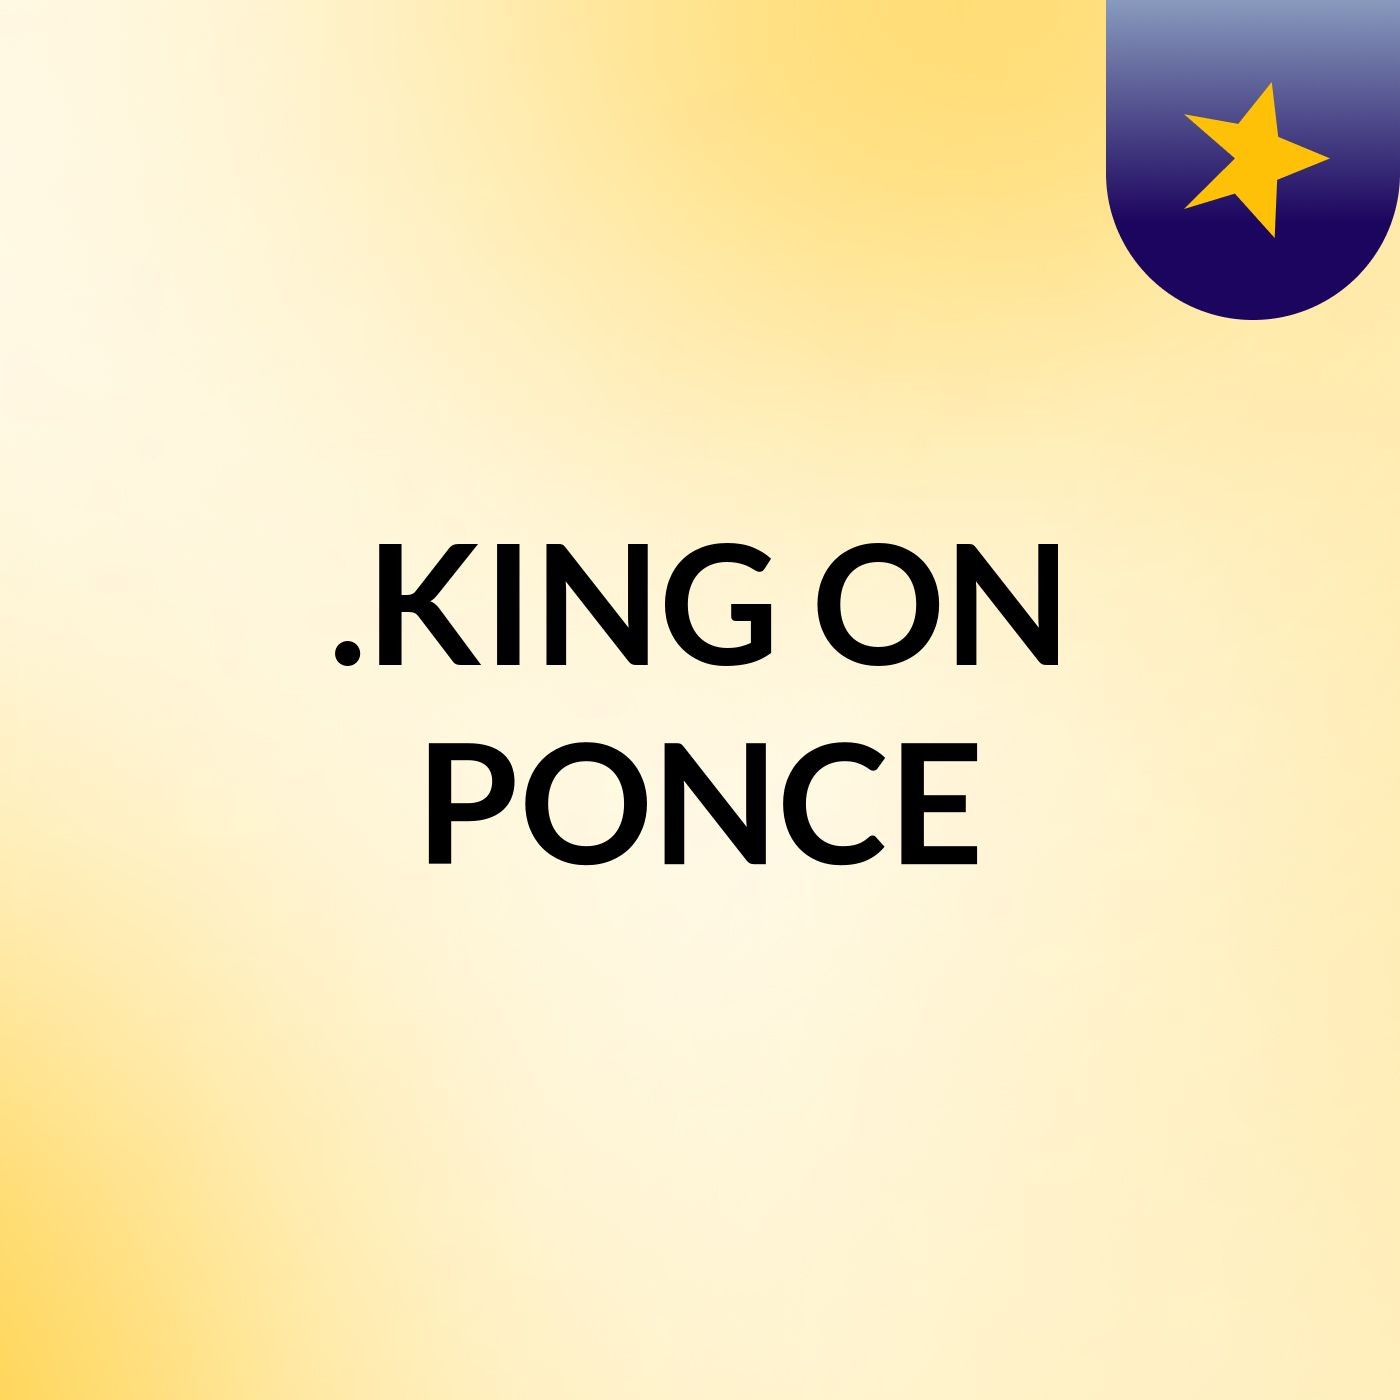 .KING ON PONCE